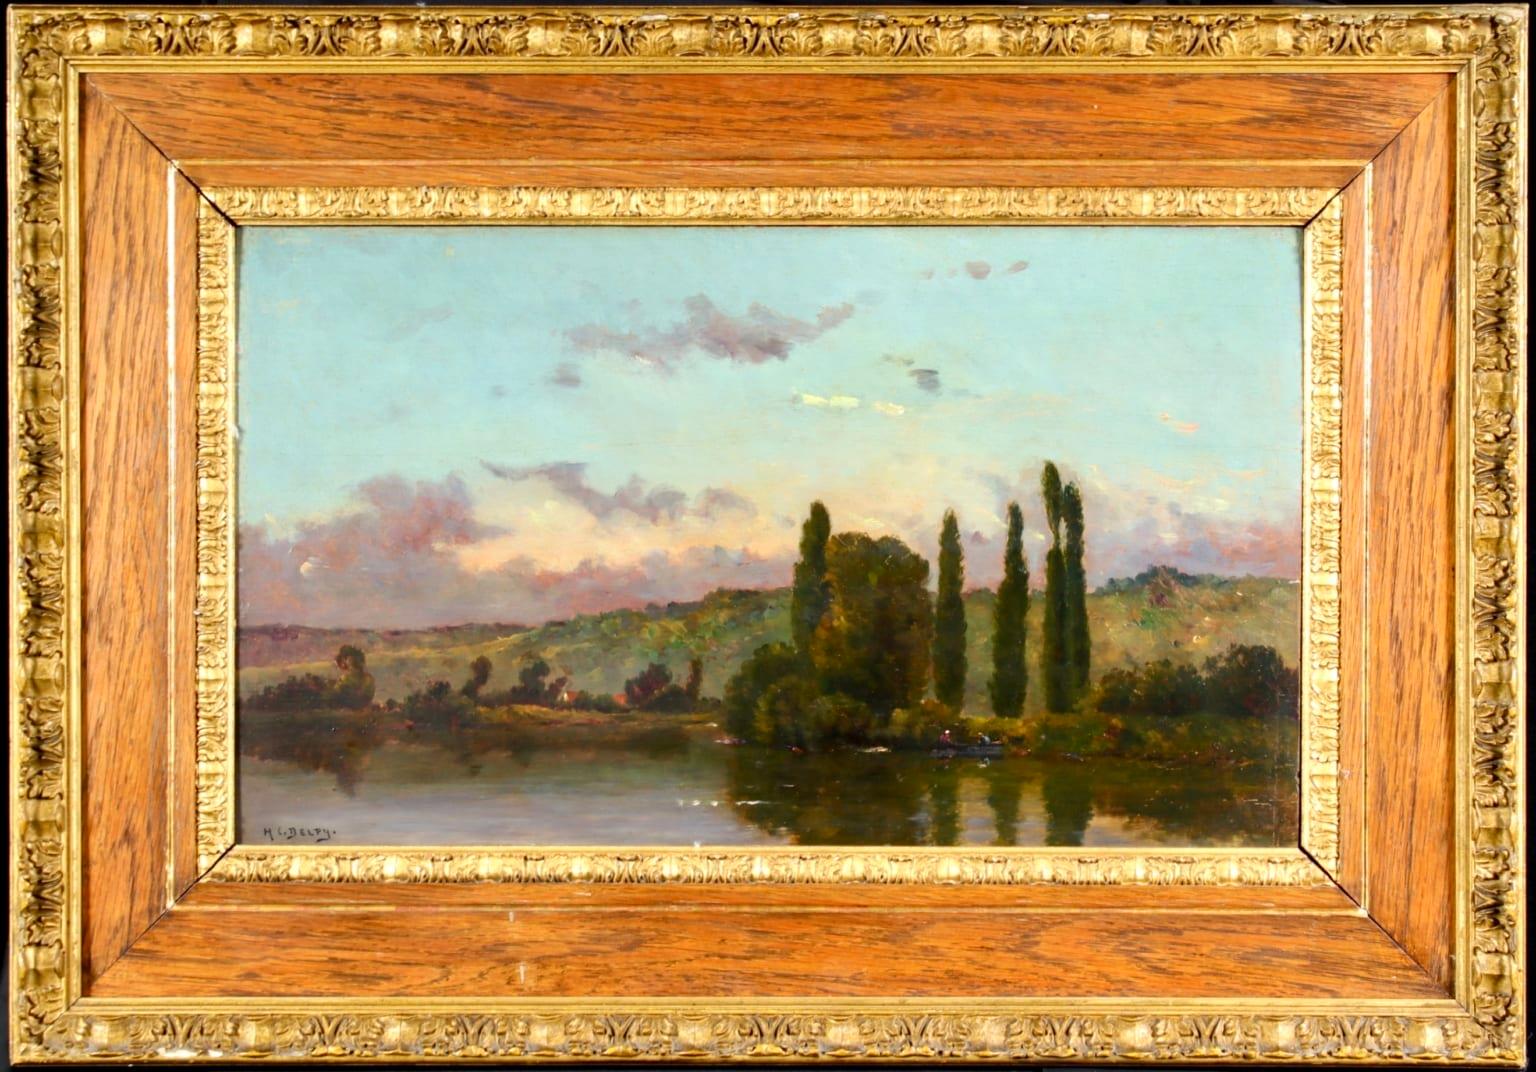 On the Seine - Barbizon Oil, Figures on River in Landscape by Hippolyte Delpy - Painting by Hippolyte Camille Delpy